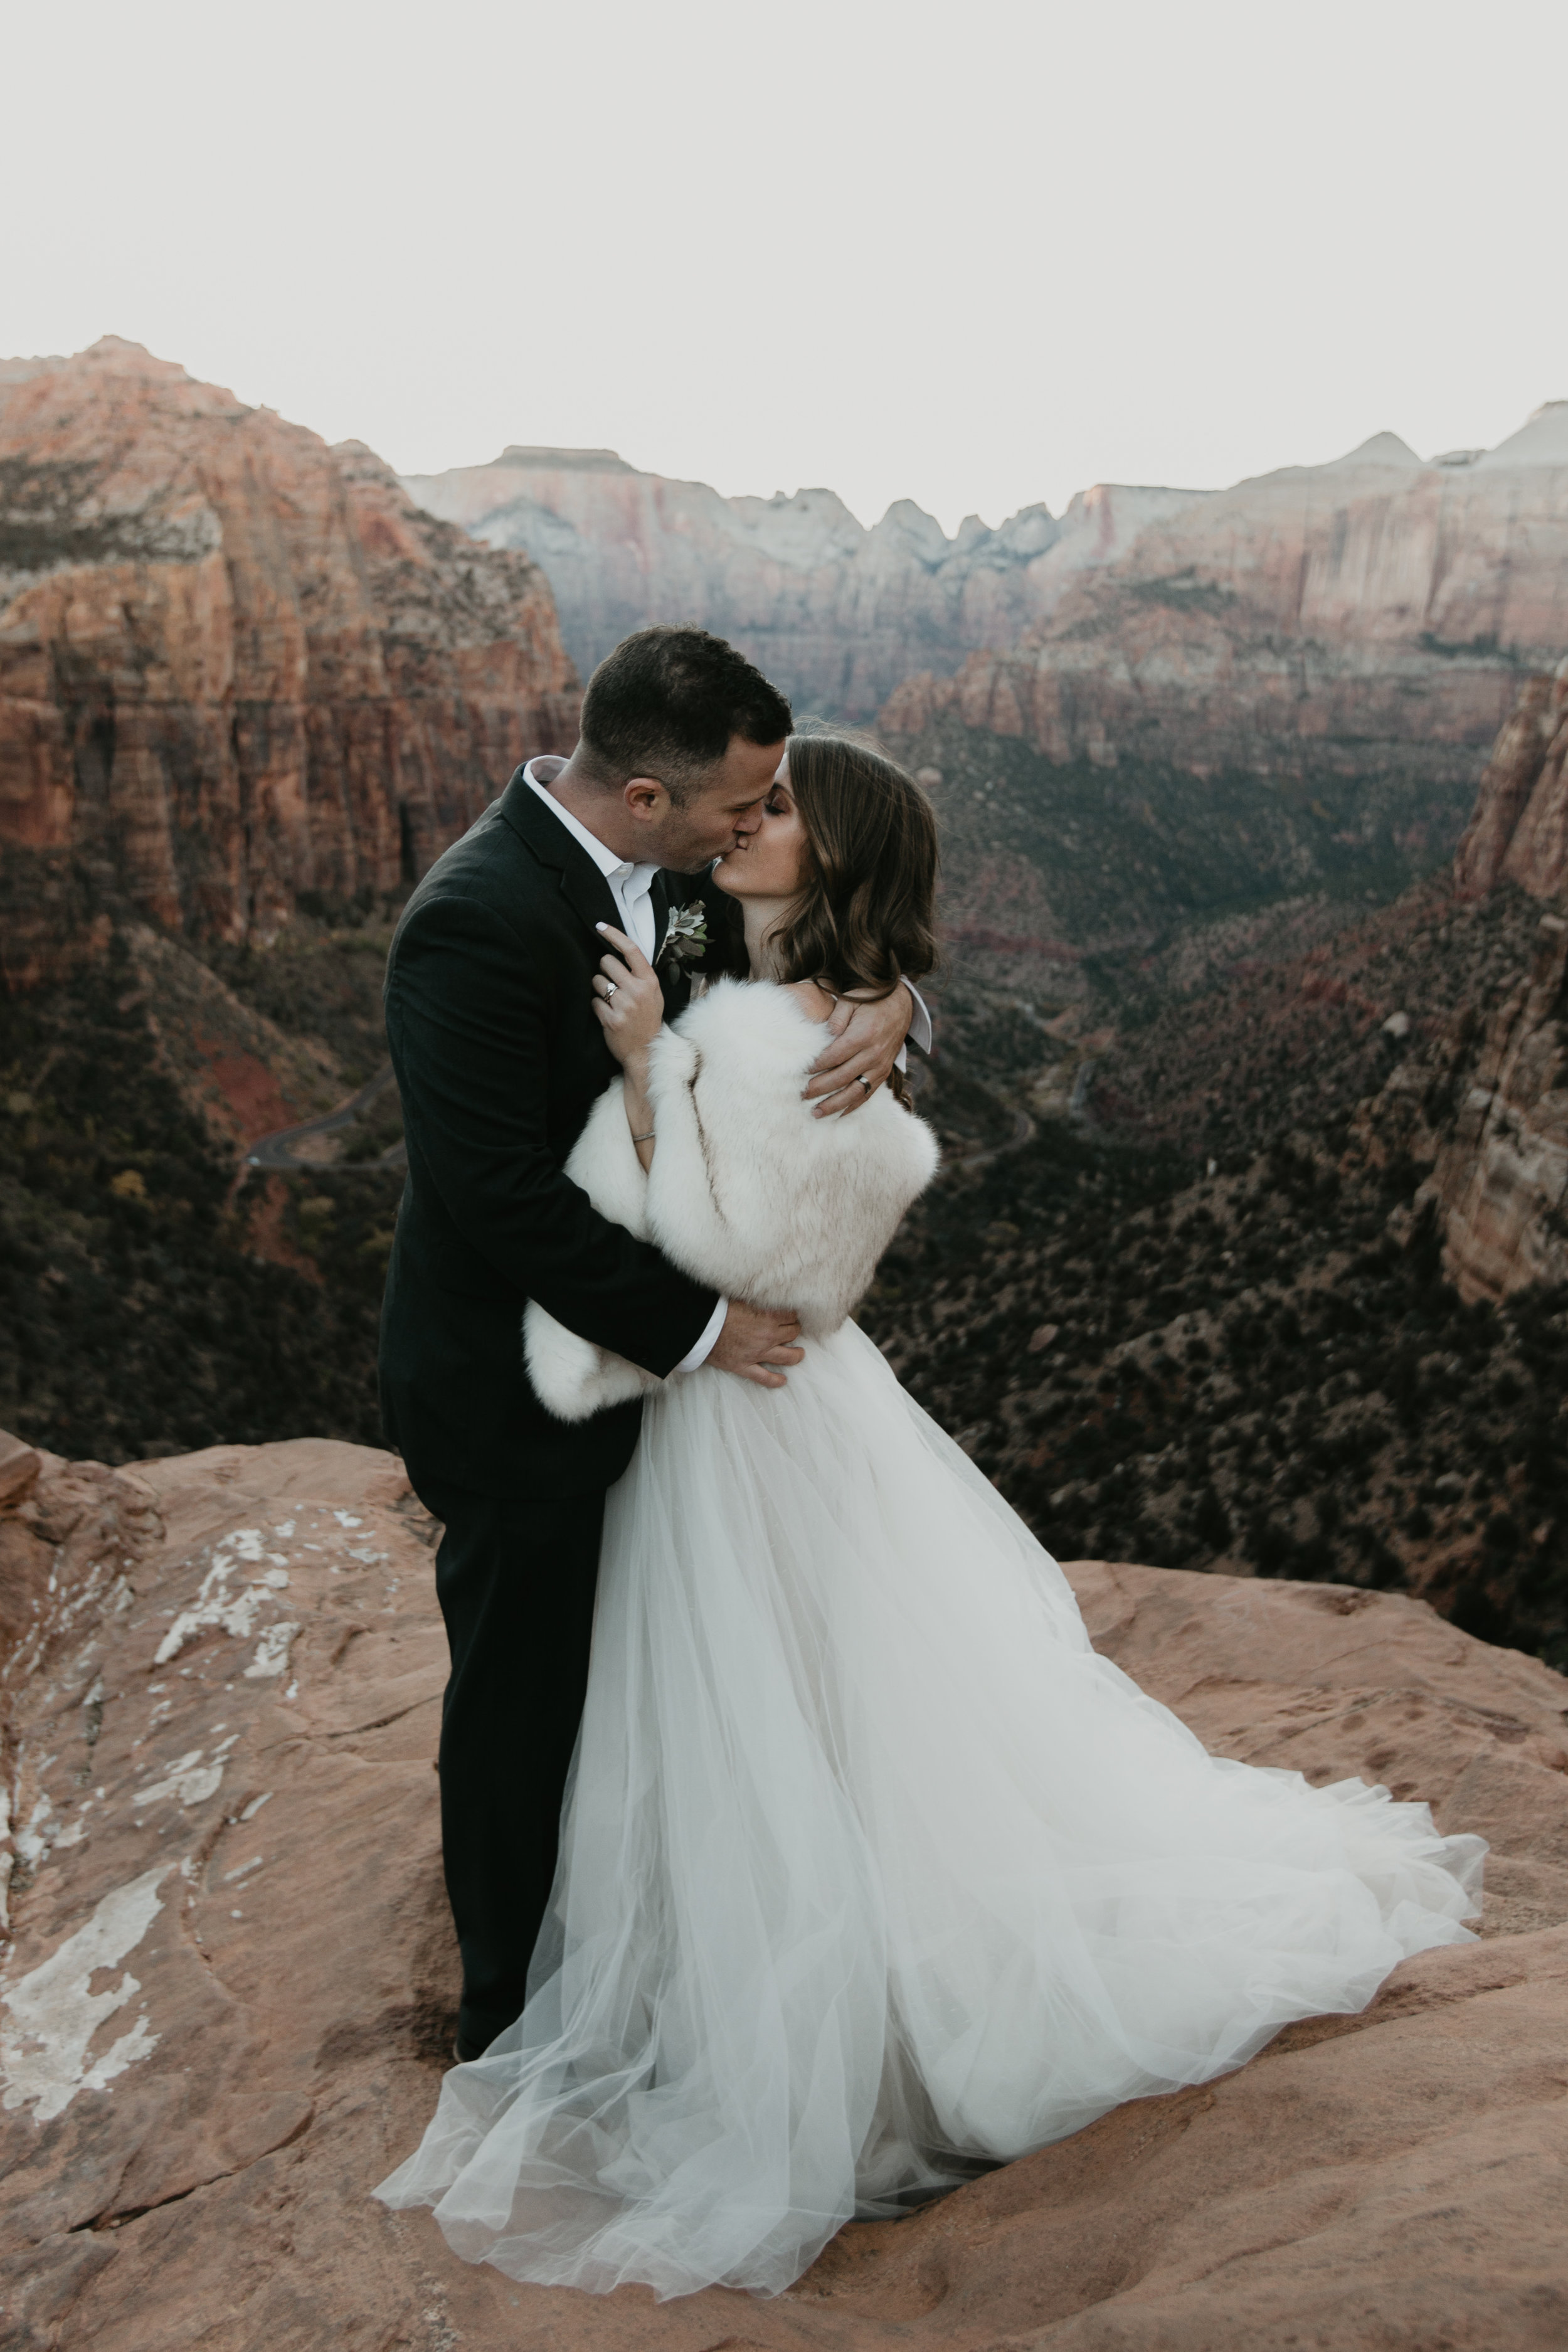 nicole-daacke-photography-zion-national-park-elopement-photographer-canyon-overlook-trail-elope-hiking-adventure-wedding-photos-fall-utah-red-rock-canyon-stgeorge-eloping-photographer-70.jpg